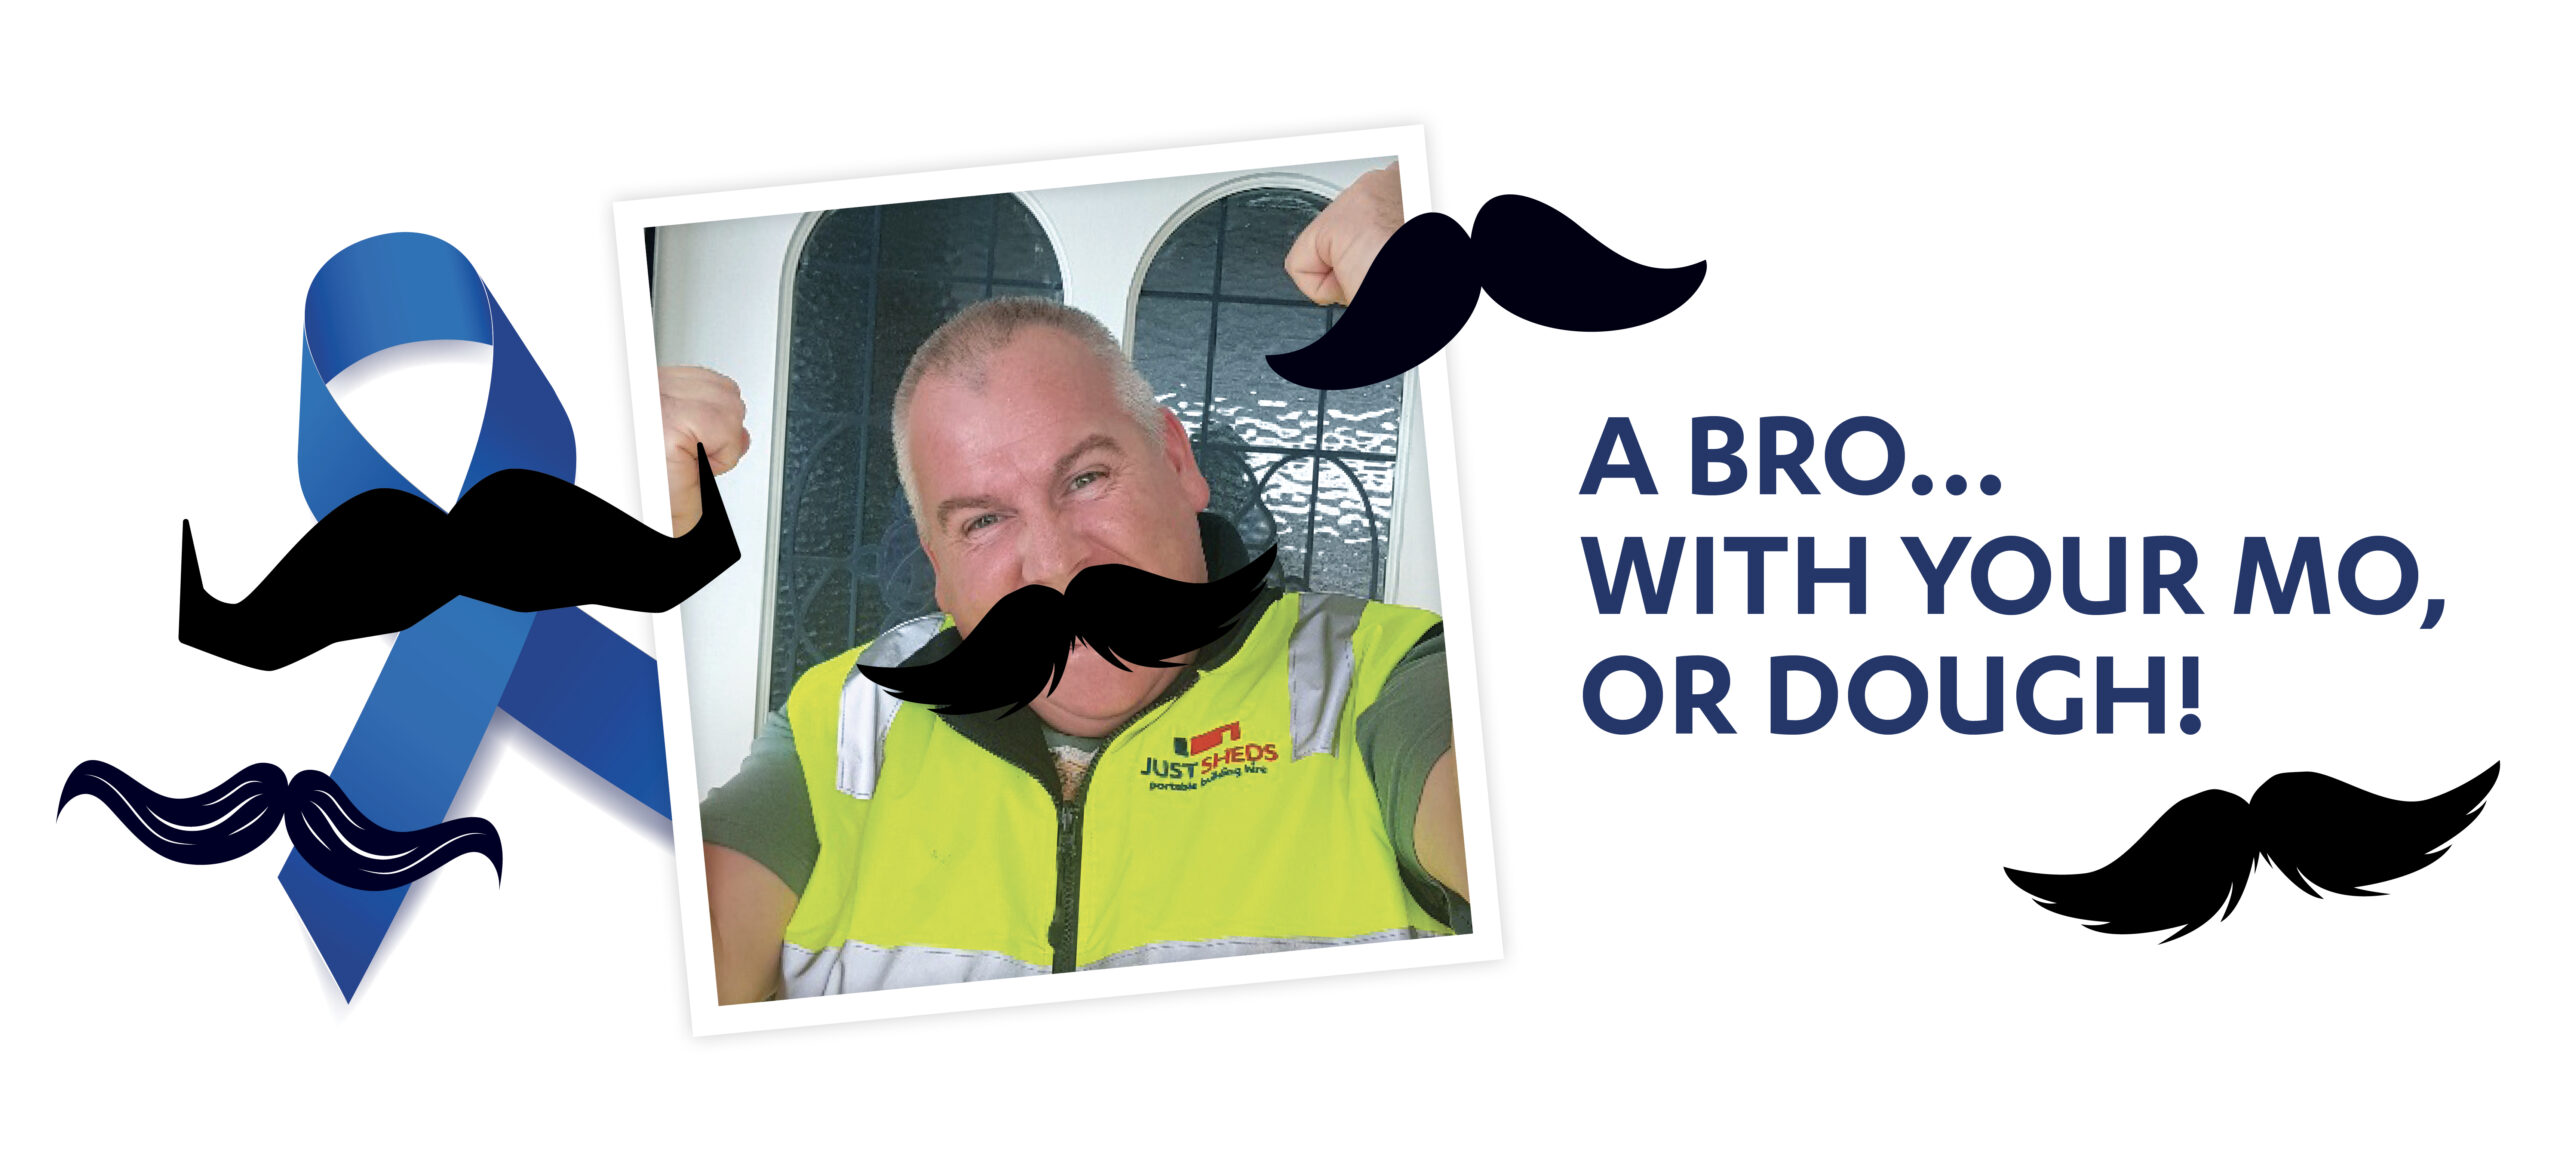 Save a bro… with your mo, or dough!